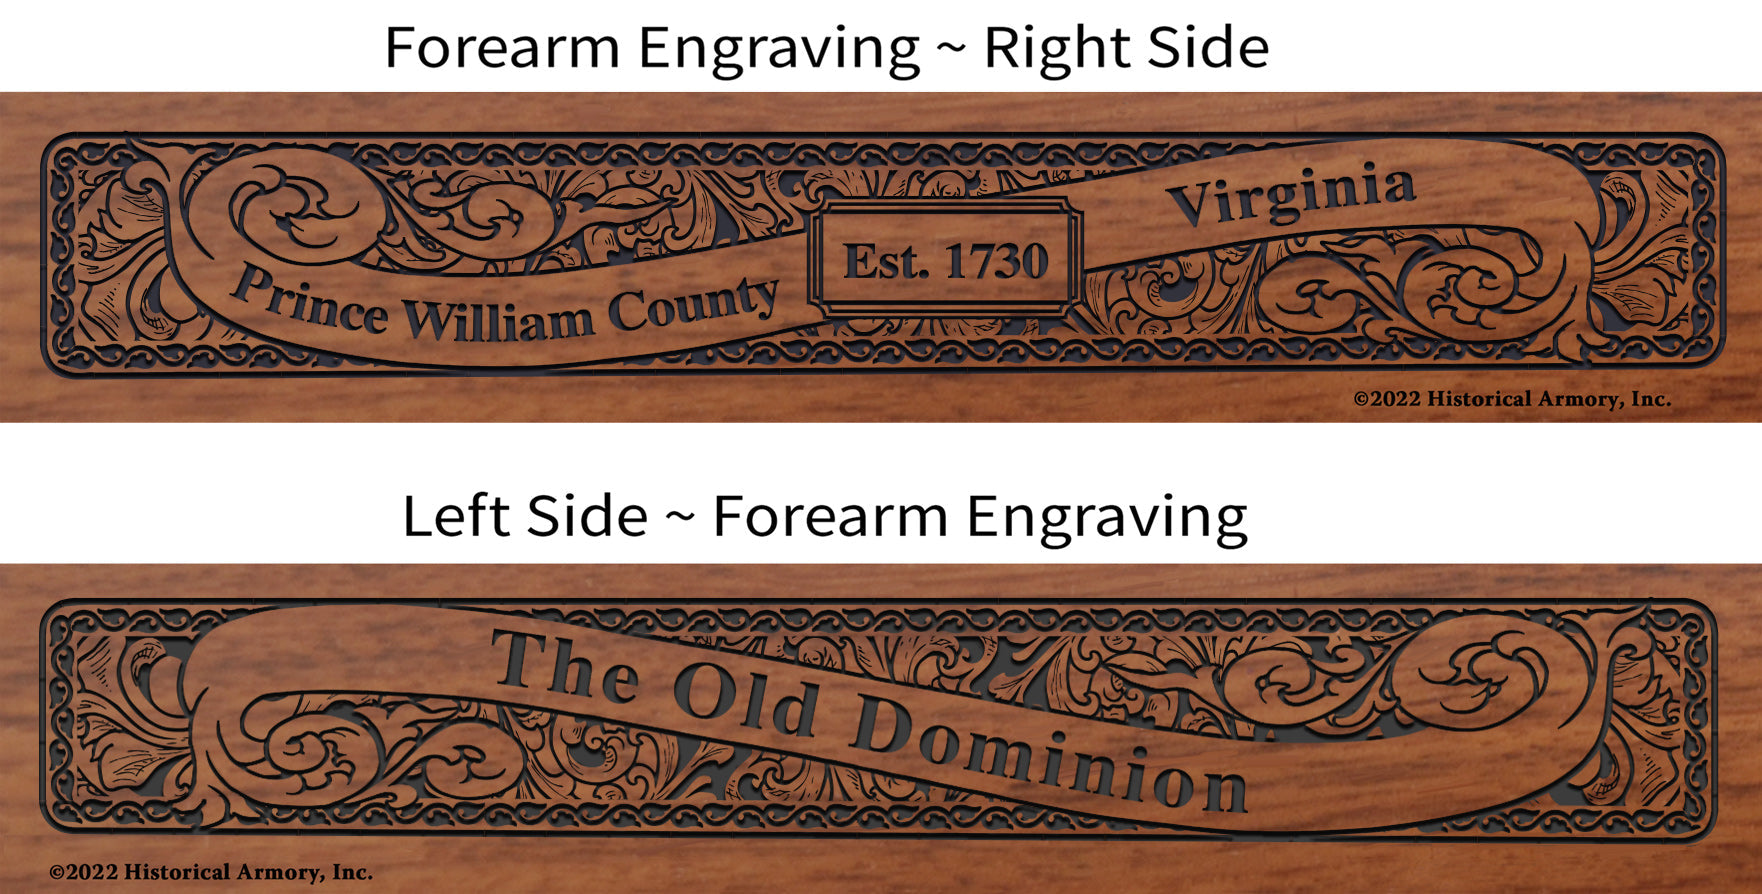 Prince William County Virginia Engraved Rifle Forearm